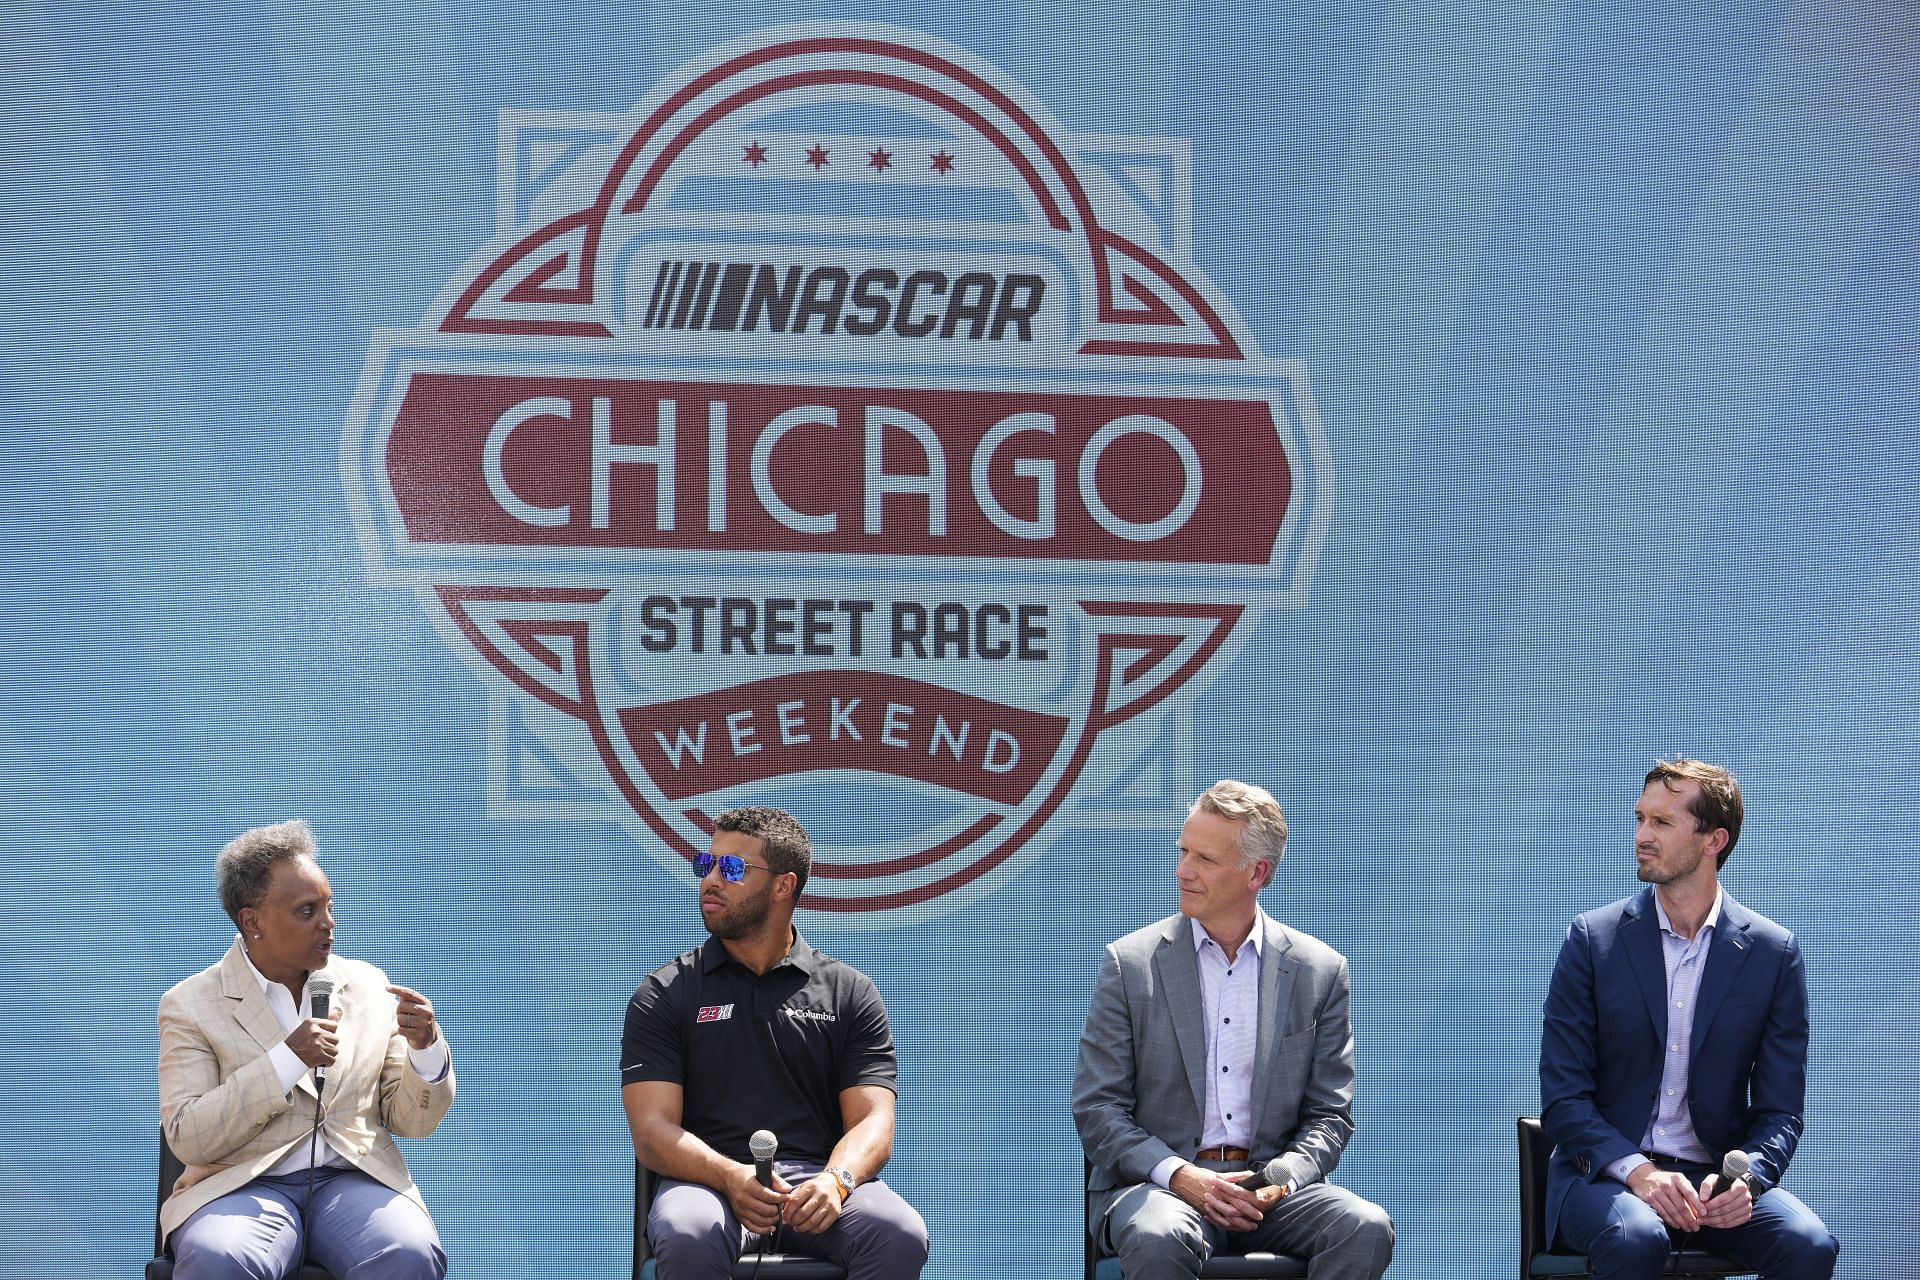 NASCAR President Steve Phelps and Senior Vice President of Strategy and Innovation Ben Kennedy listen as Chicago Mayor Lori Lightfoot speaks during a press conference in promotion of the Chicago Street Race announcement